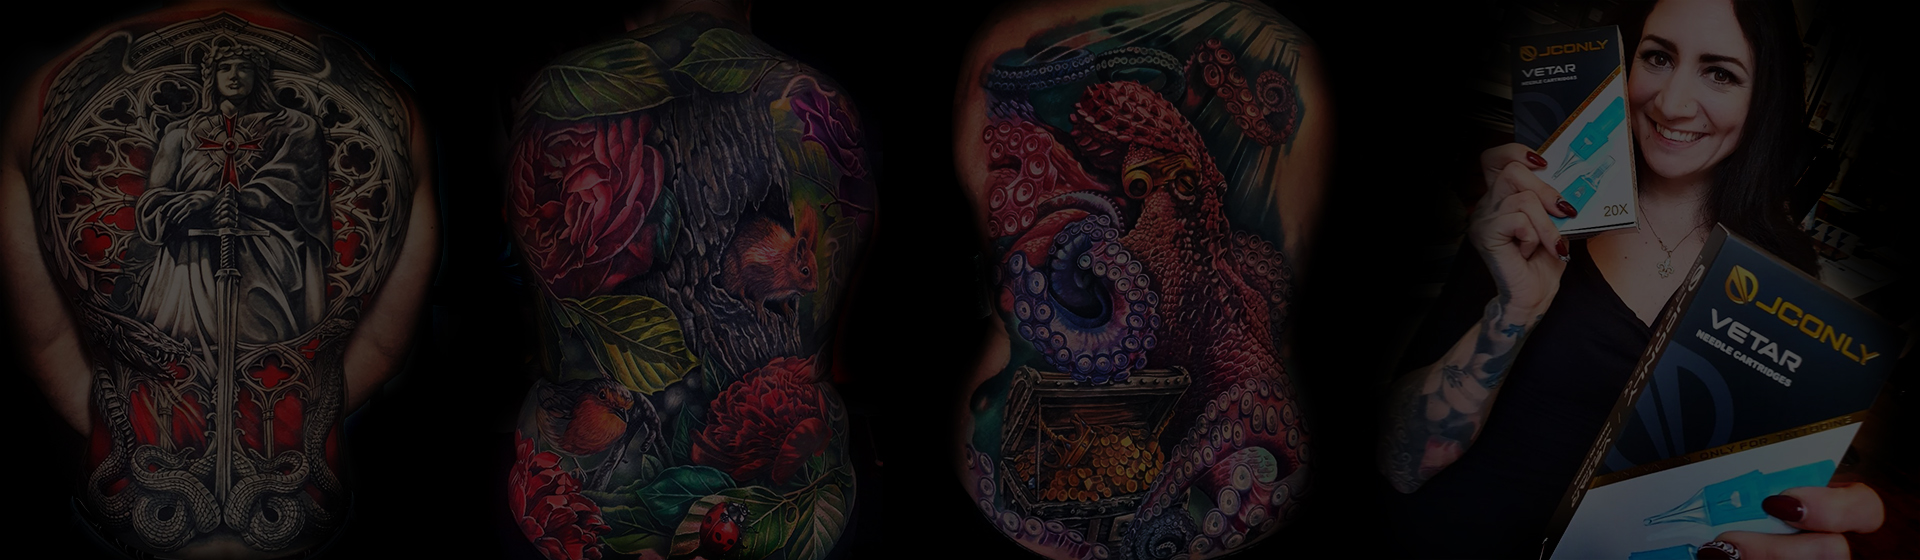 Professional tattoo artists <br>around the globe are working with JCONLY Tattoo brand